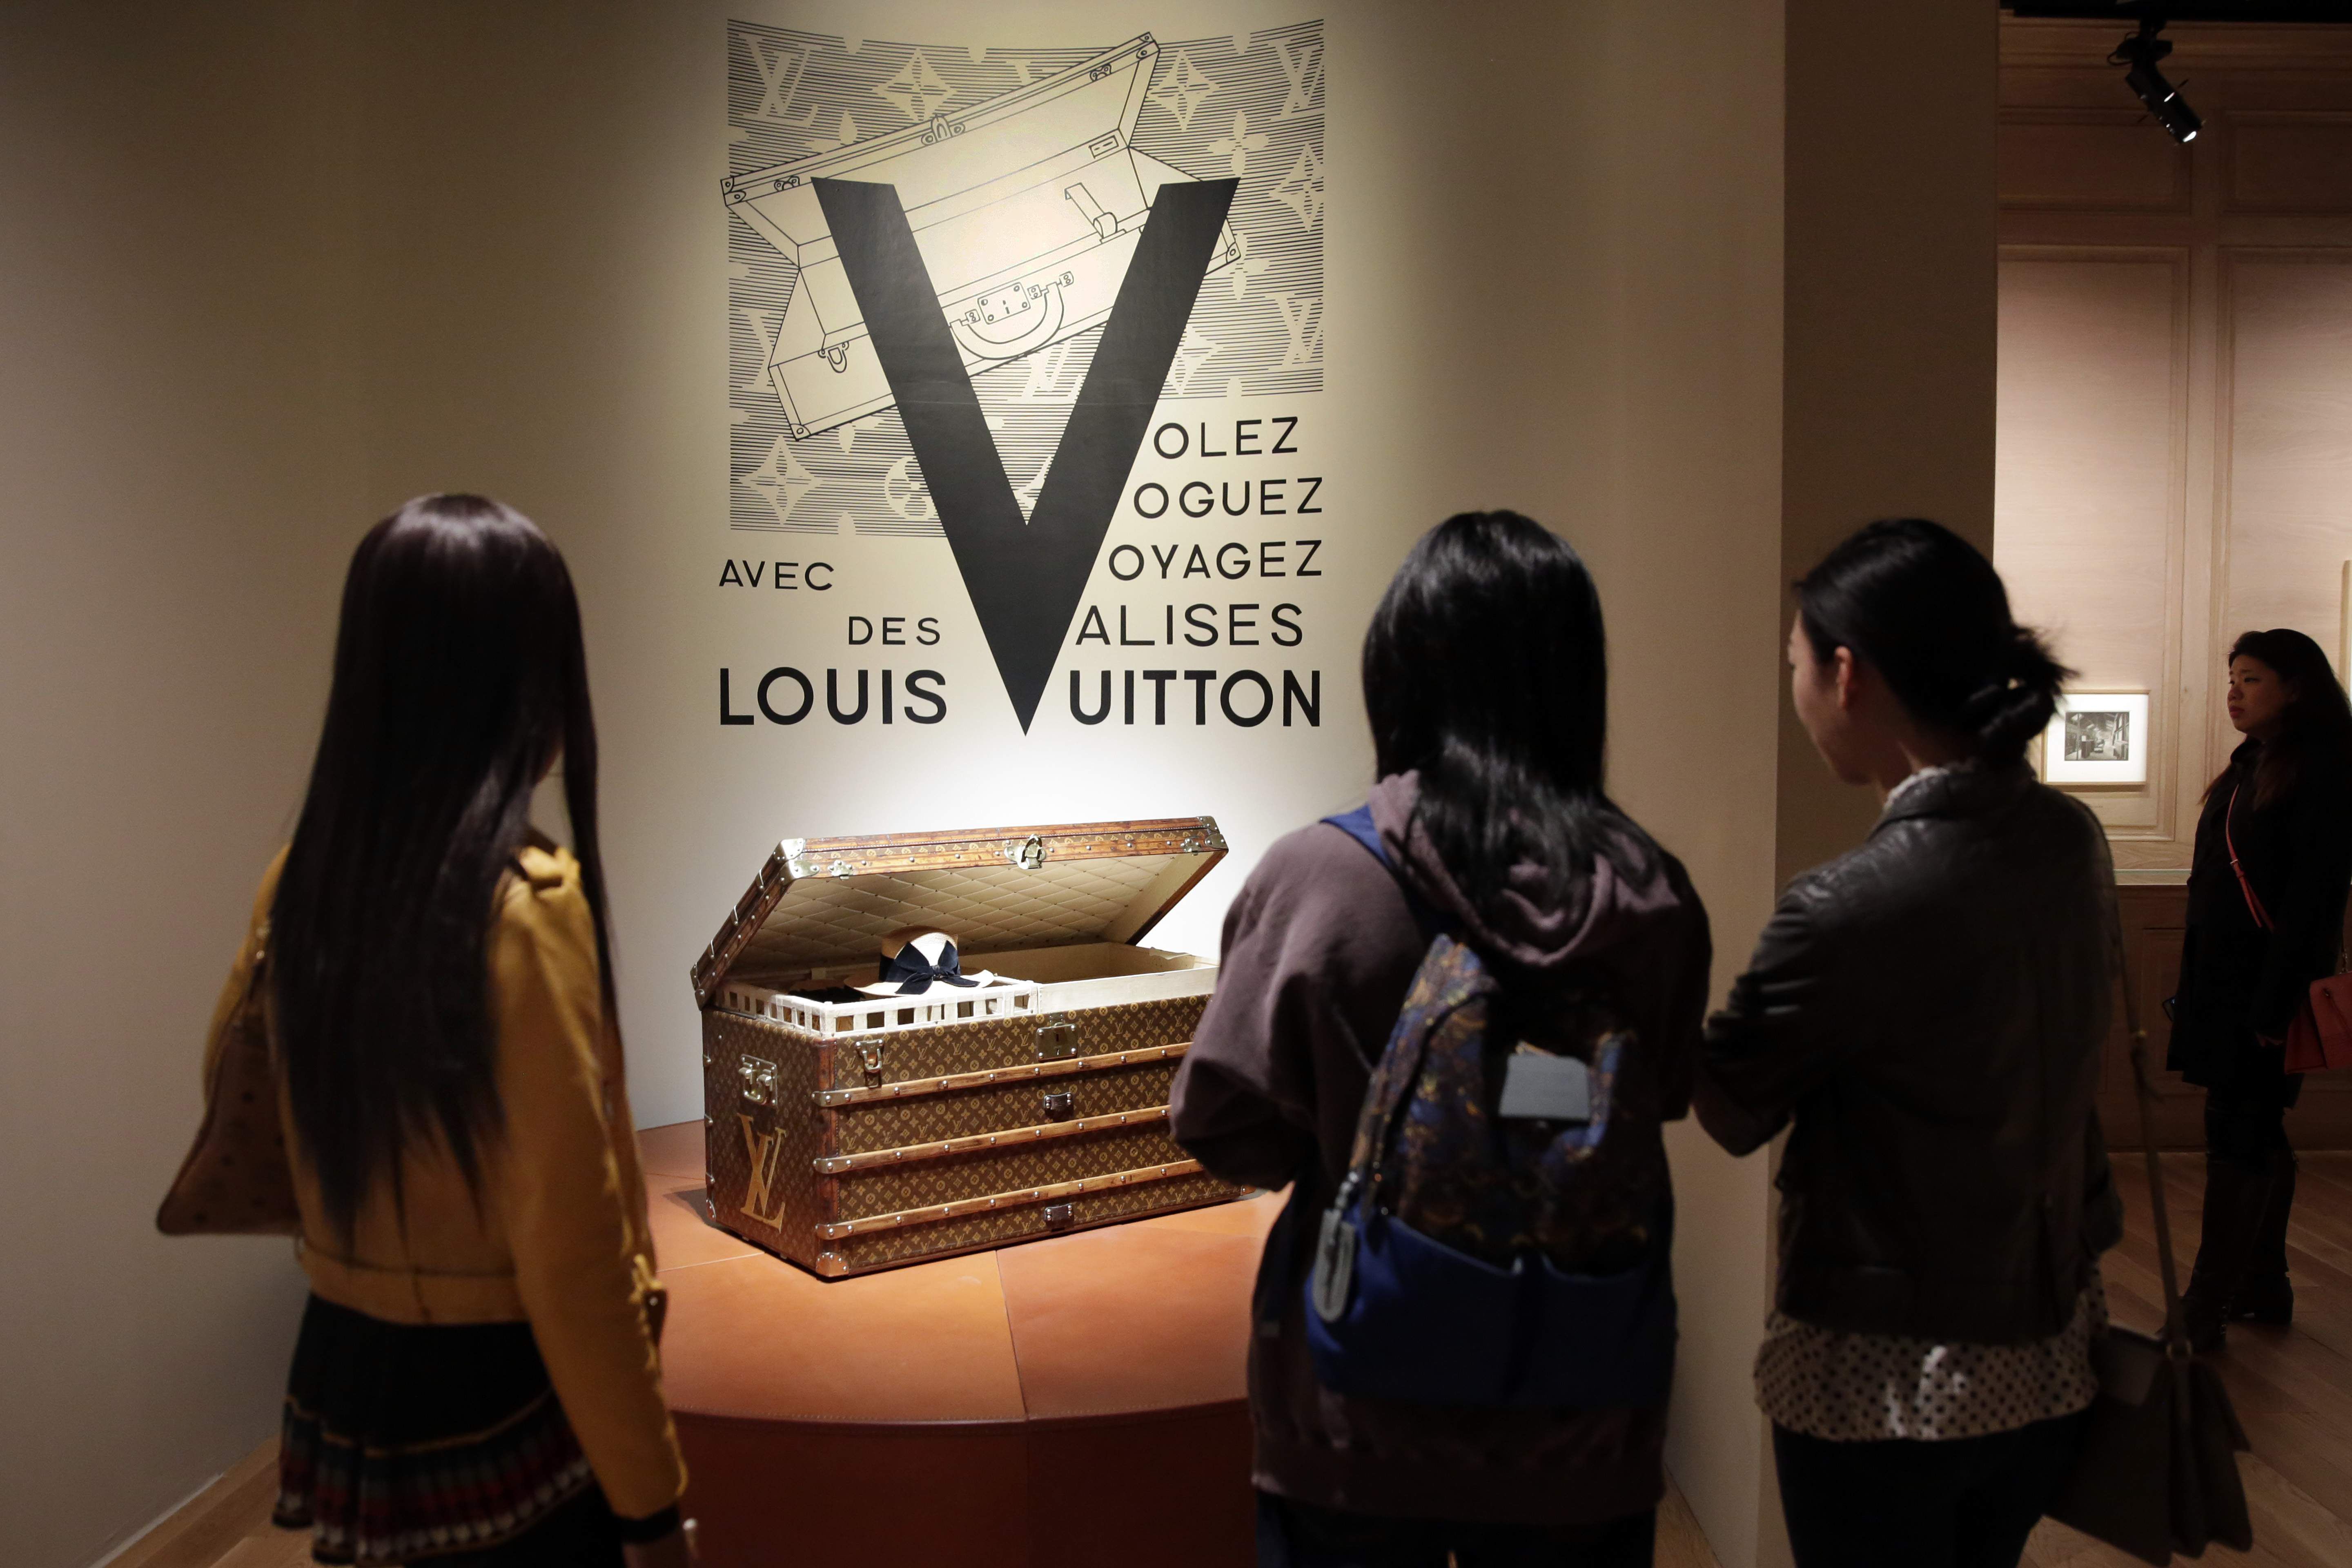 Louis Vuitton's history as a luxury travel pioneer